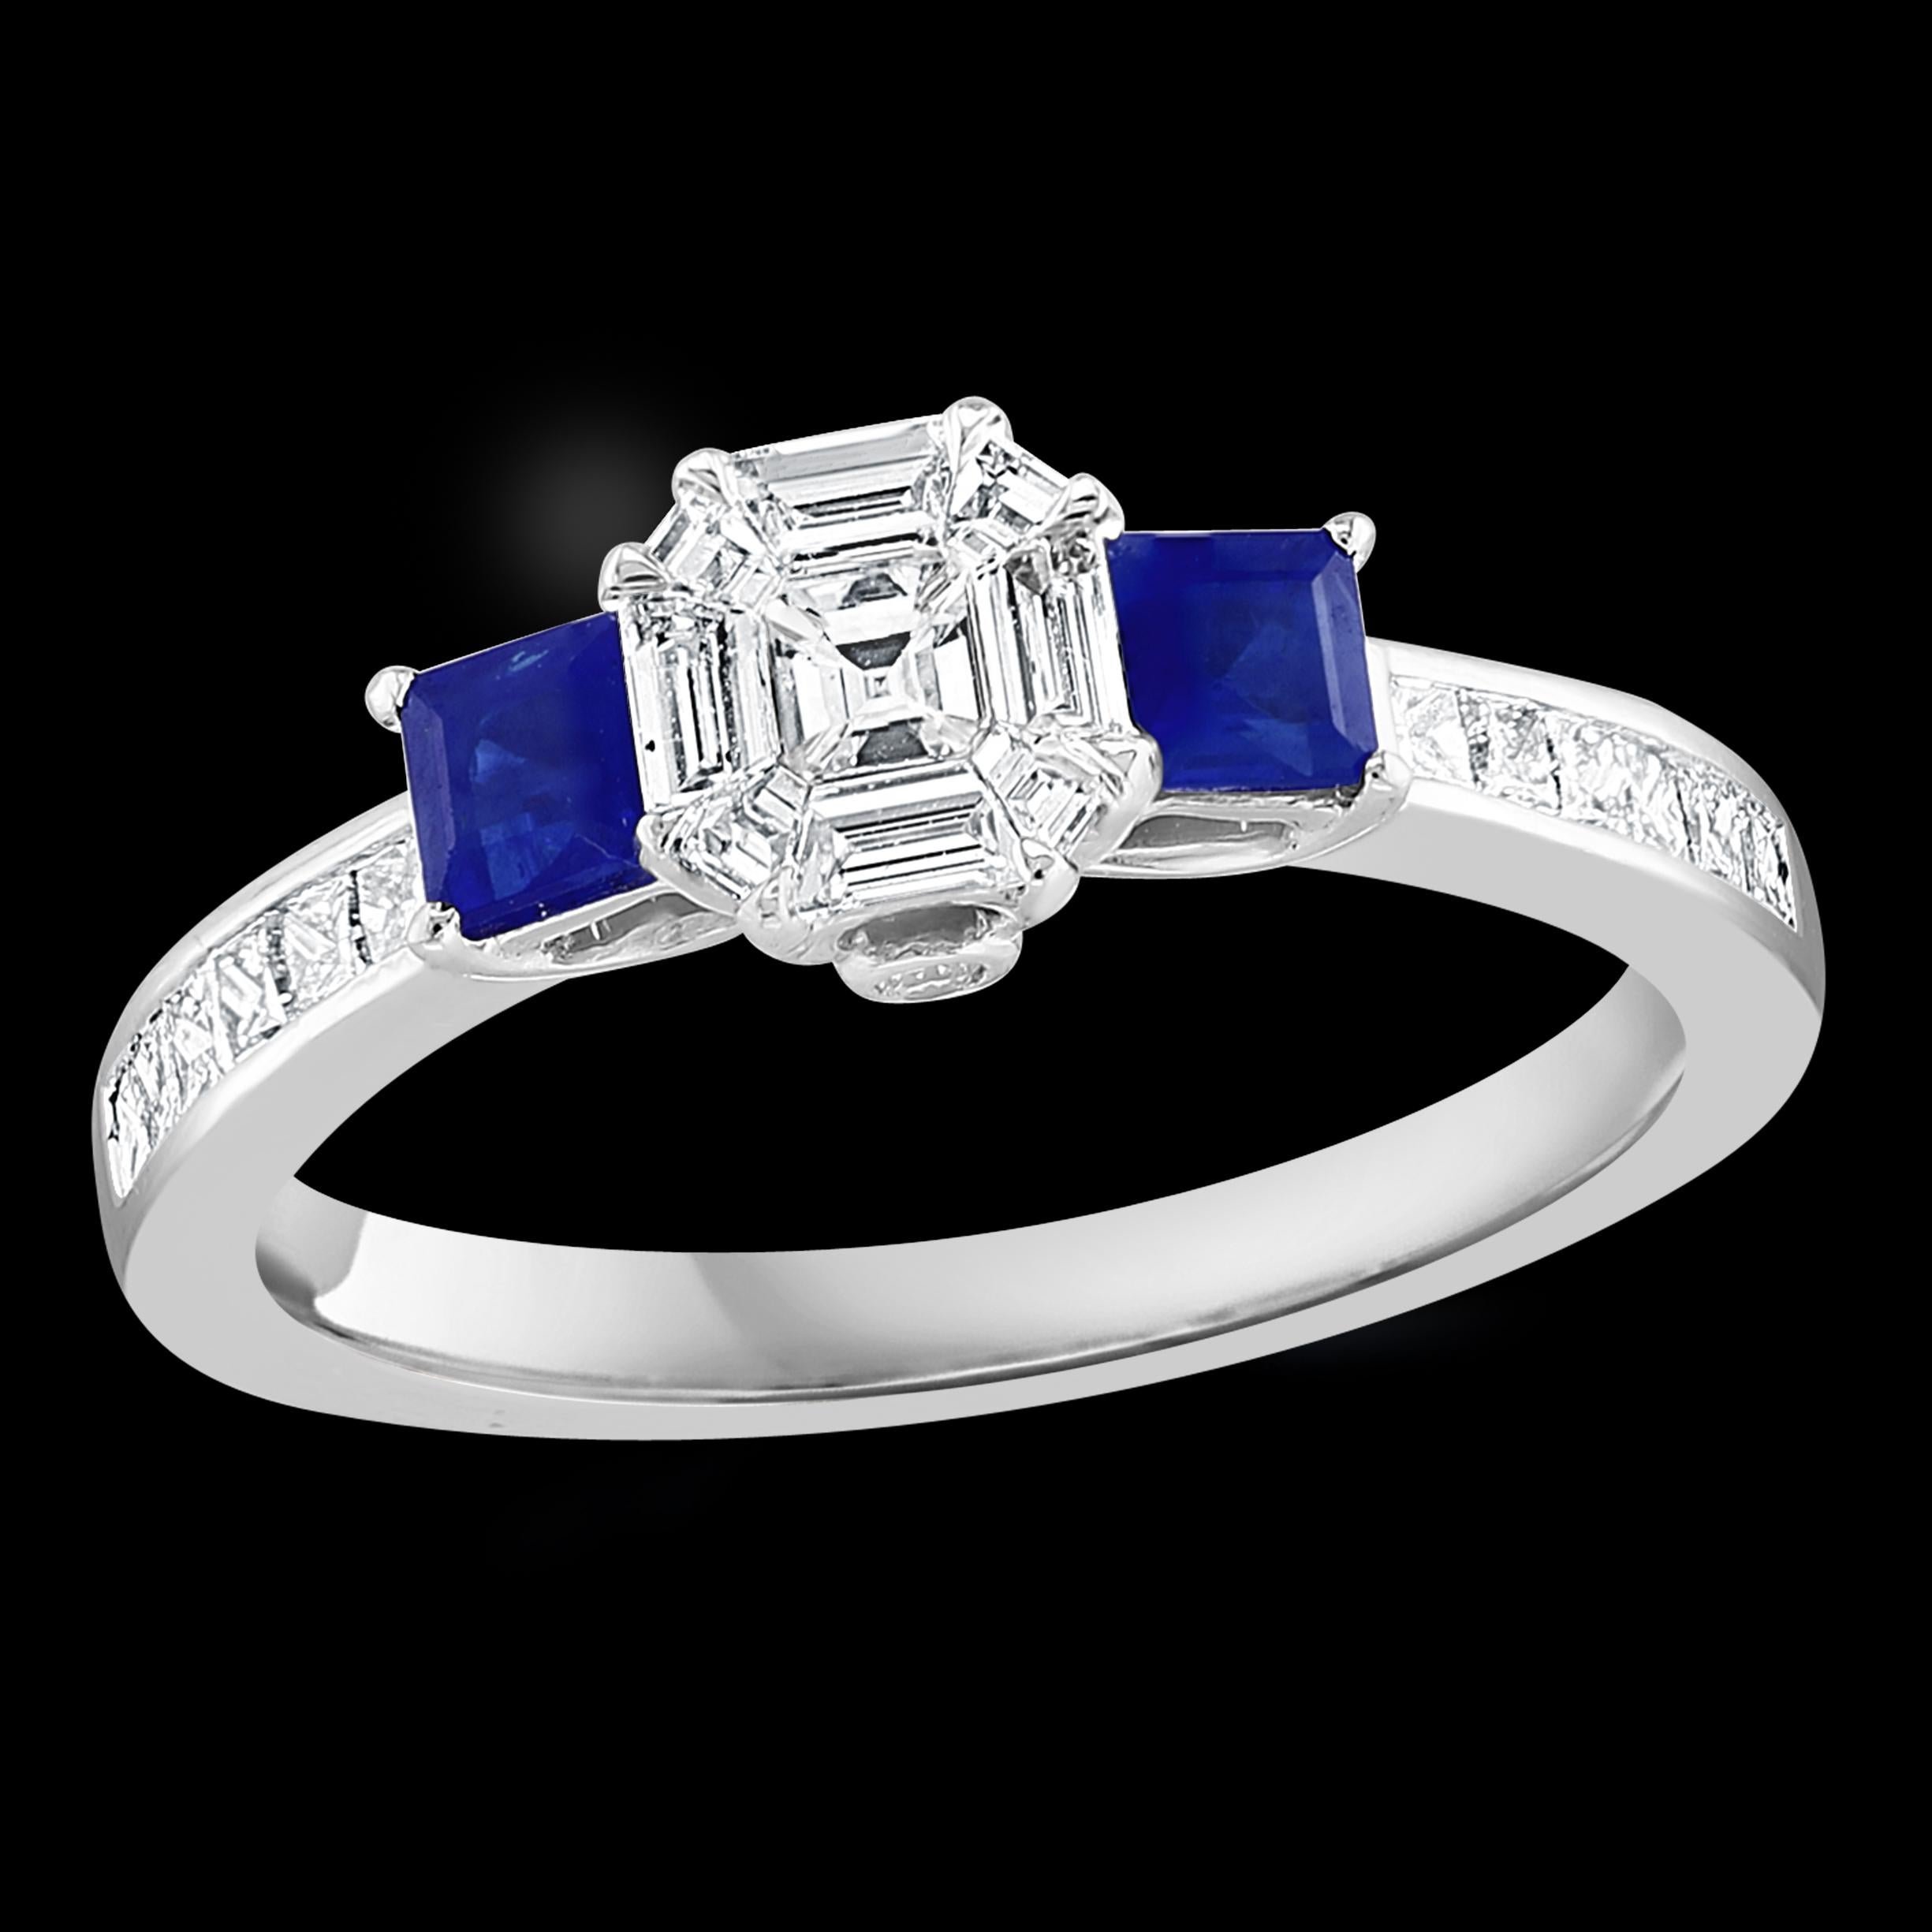 Approximately 0.70 Ct Natural Sapphire & 0.75 Ct  Diamond 18 Karat White Gold Cocktail Ring
 prong set
18 K White Gold: 4.2  gram
Stamped 18K
Ring Size  ( can be altered for no charge )
2 Square cut Natural Sapphire  Stone 
Diamonds:  approximate